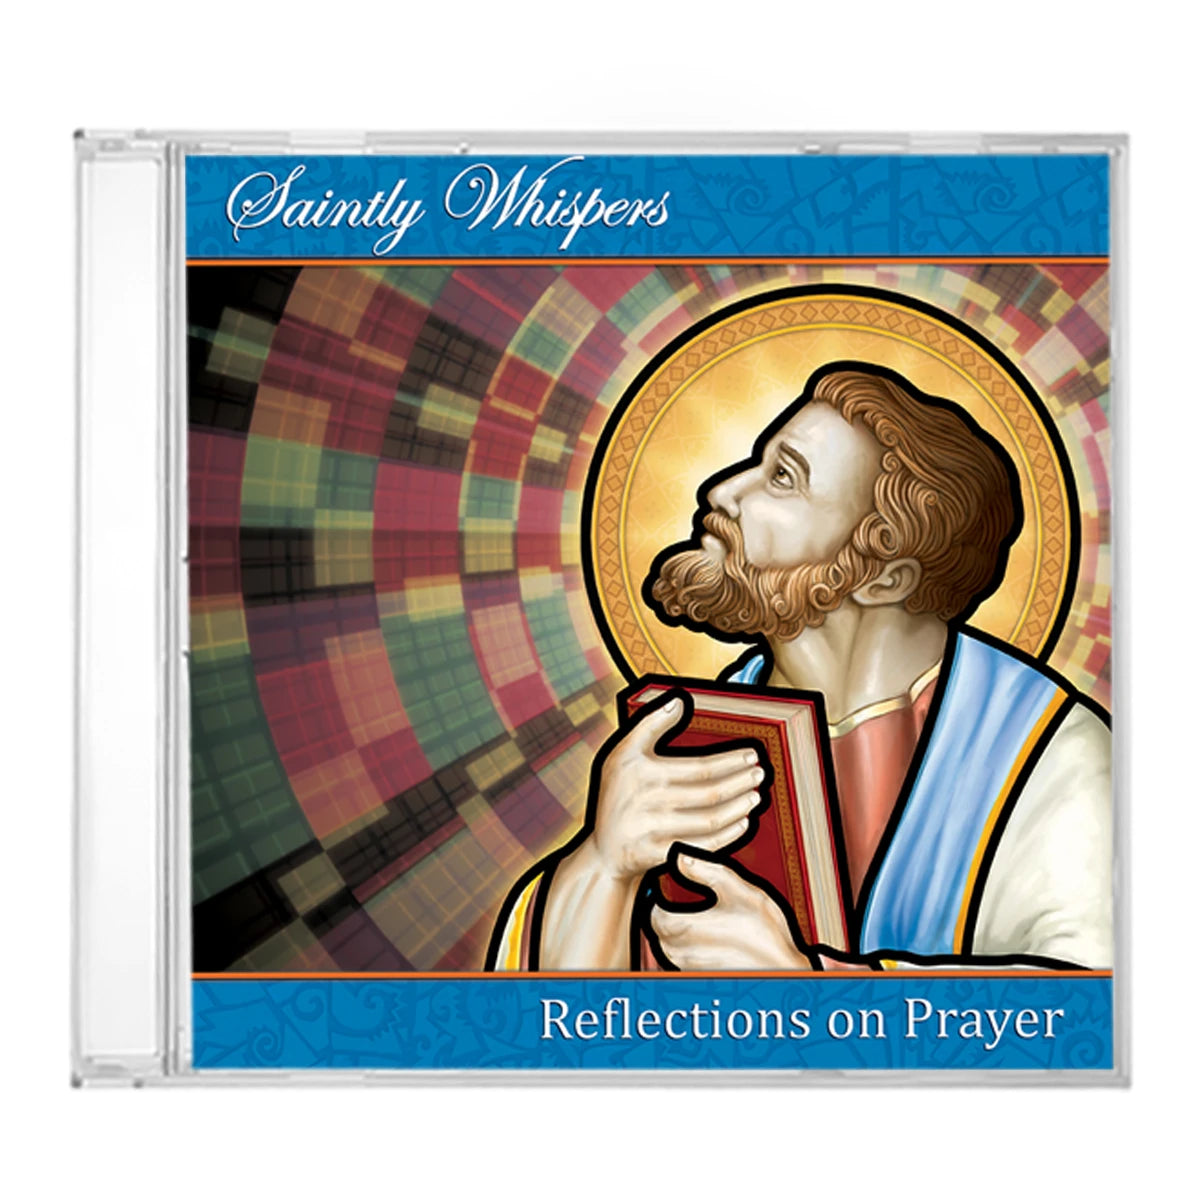 Saintly Whispers - Reflections on Prayer